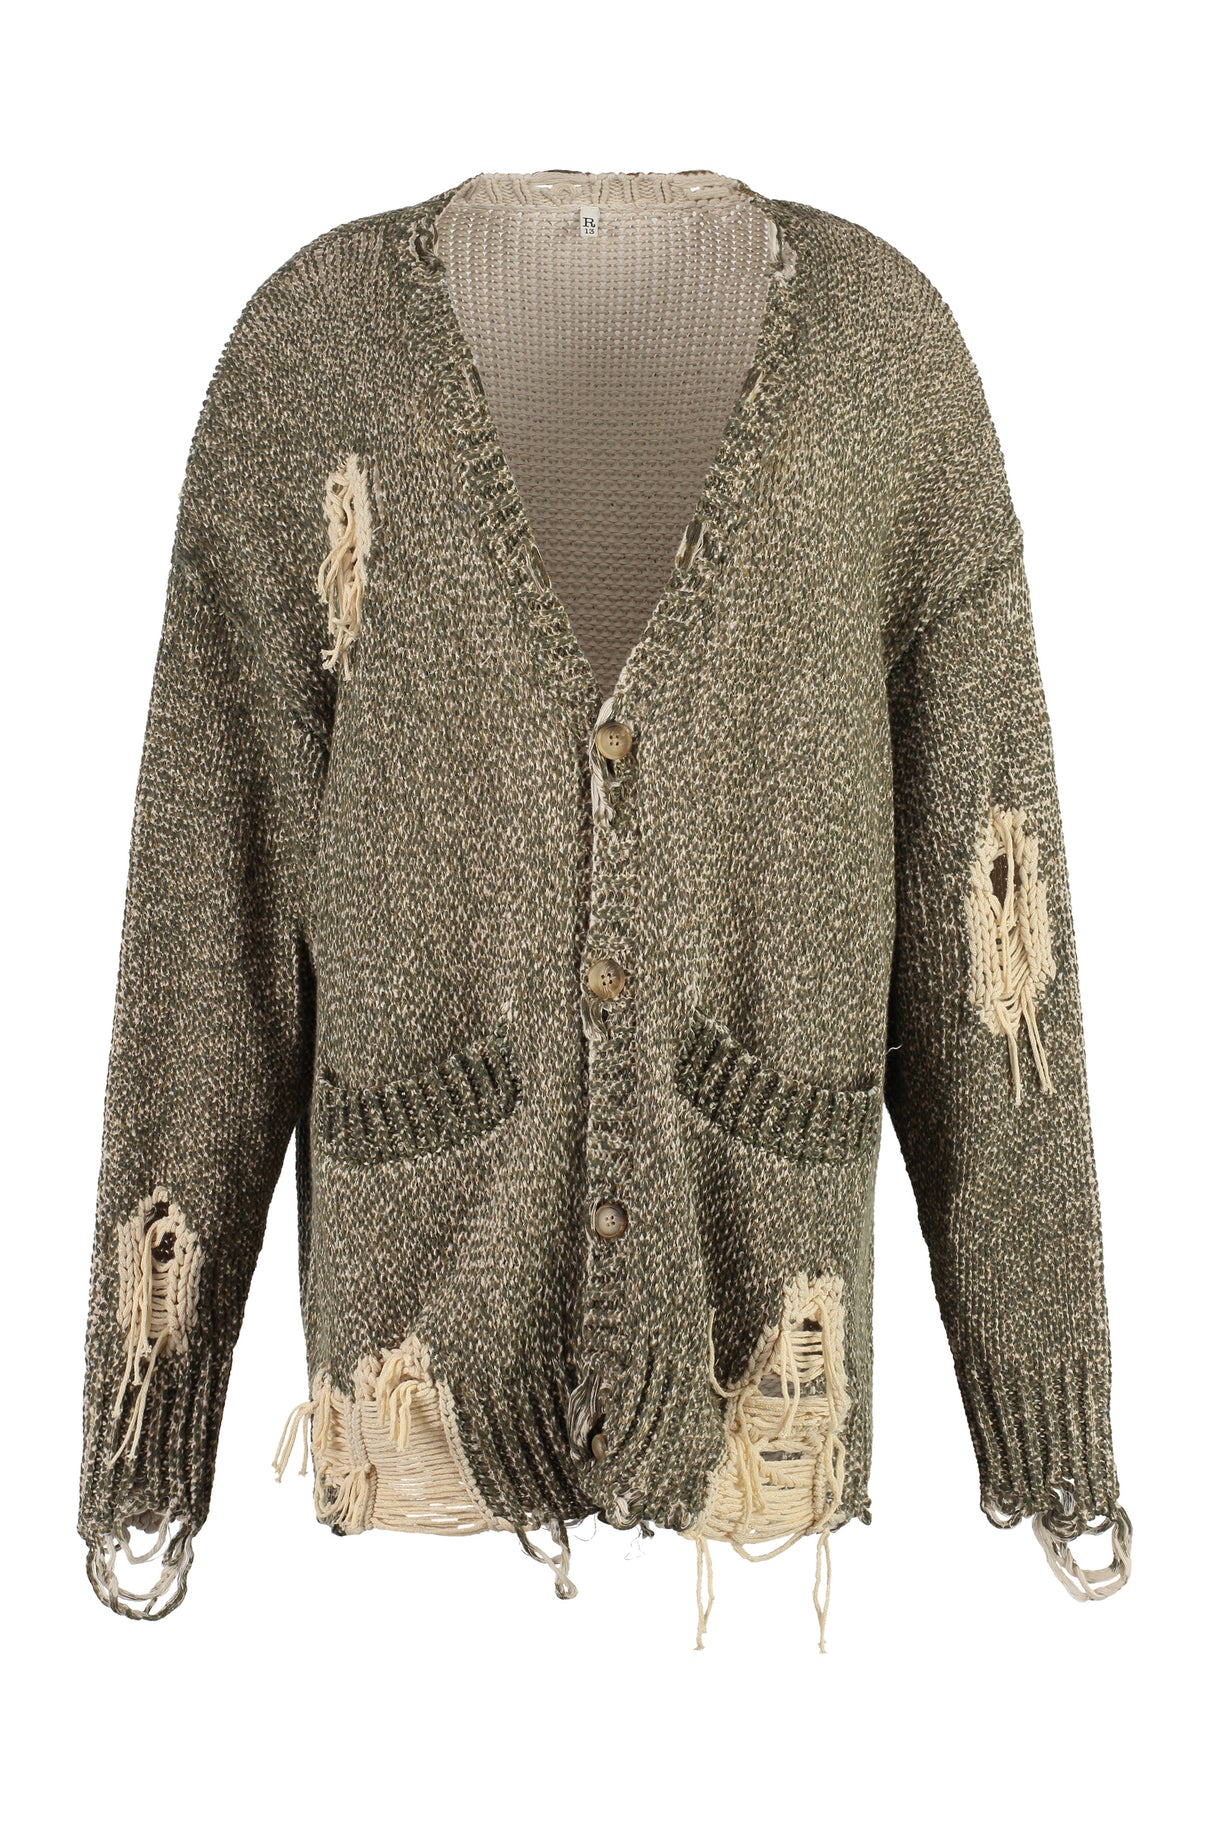 R13 Oversized Destroyed Cardigan - Green